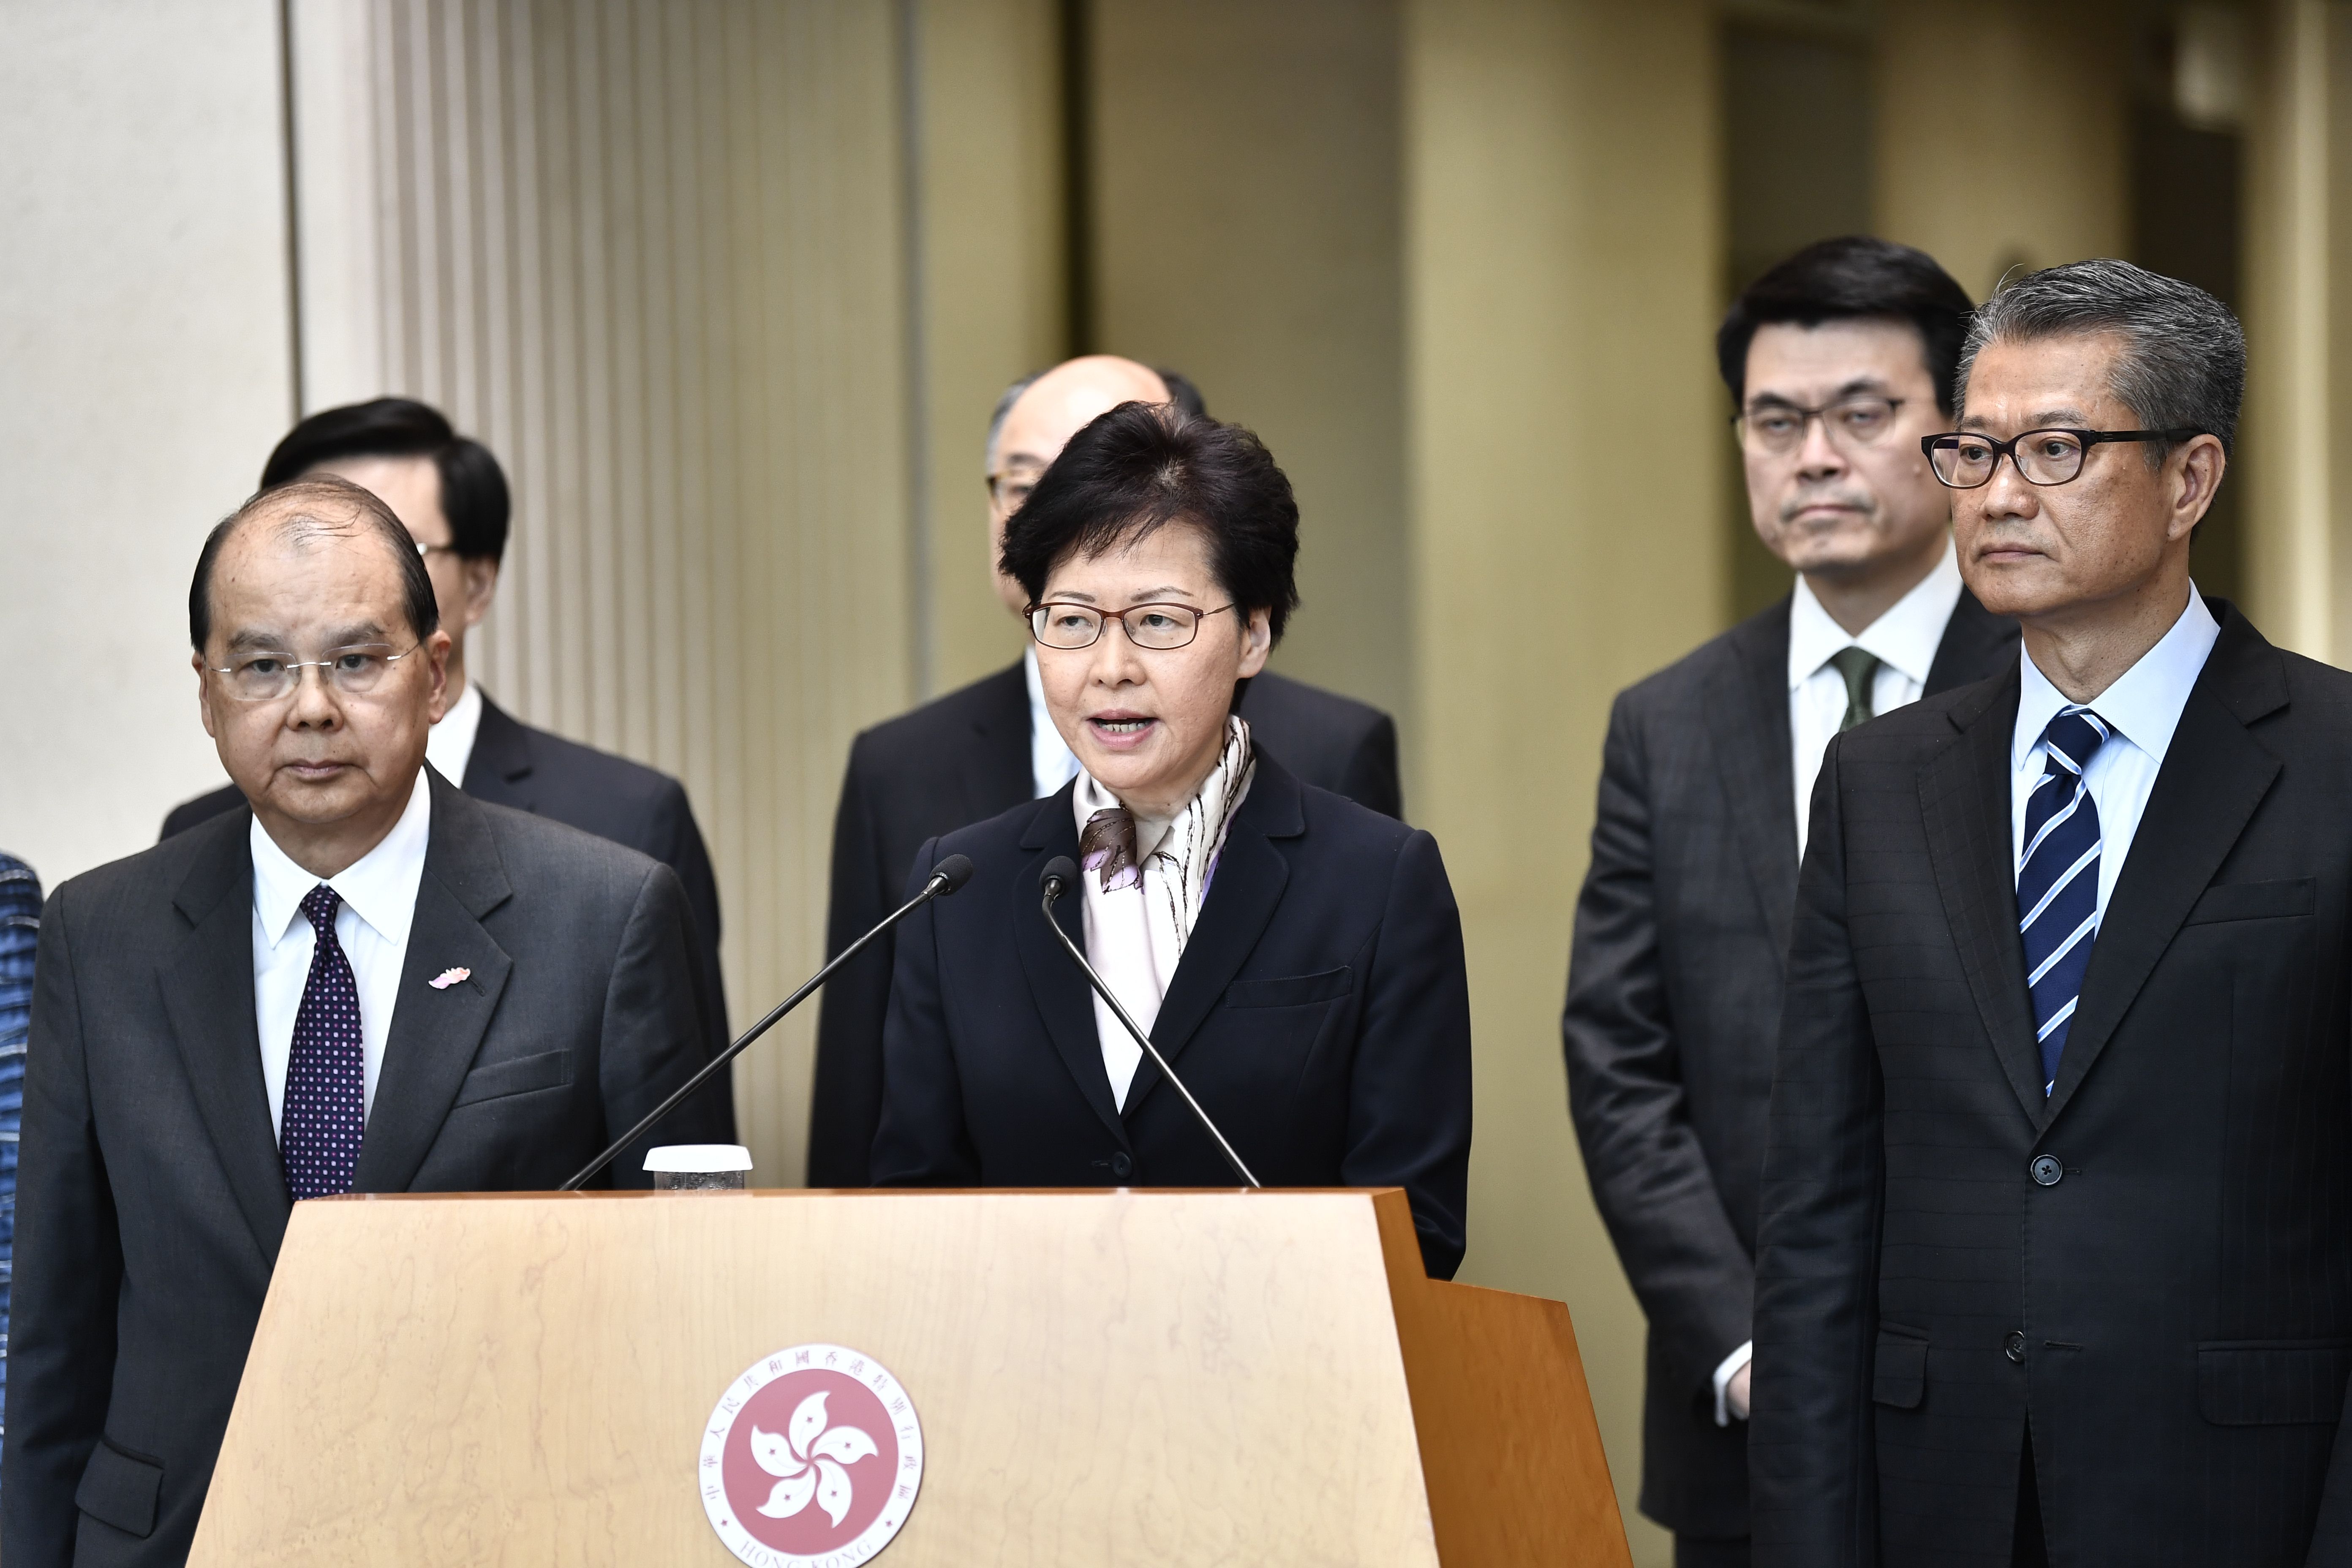 Hong Kong leader Carrie Lam speaks to the media Monday.